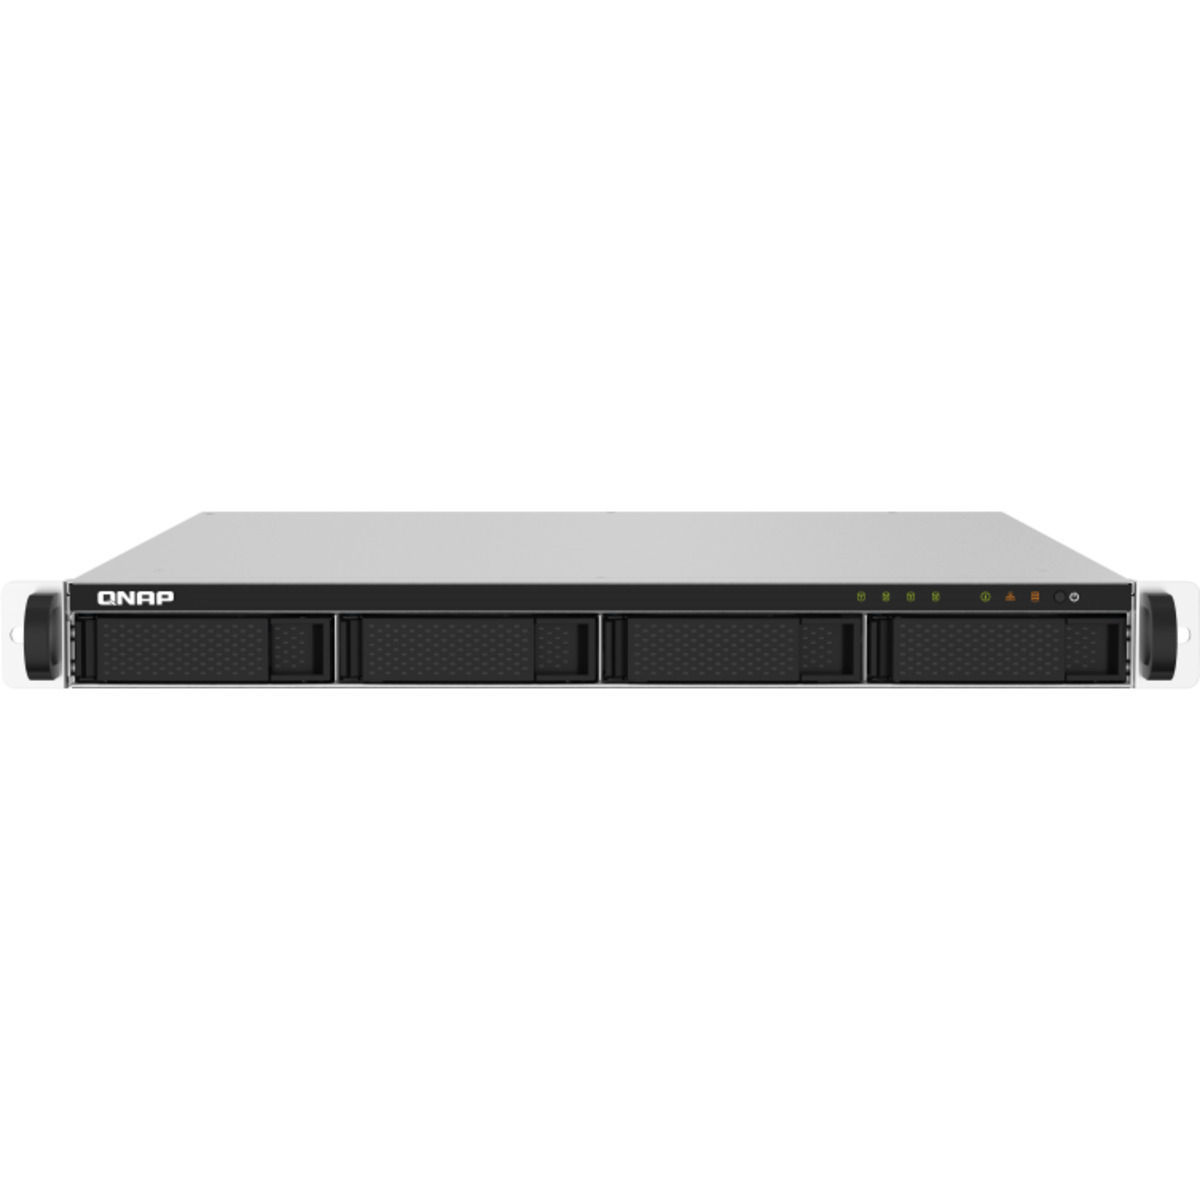 QNAP TS-432PXU-RP 32tb 4-Bay RackMount Personal / Basic Home / Small Office NAS - Network Attached Storage Device 4x8tb Western Digital Red Pro WD8005FFBX 3.5 7200rpm SATA 6Gb/s HDD NAS Class Drives Installed - Burn-In Tested - FREE RAM UPGRADE TS-432PXU-RP